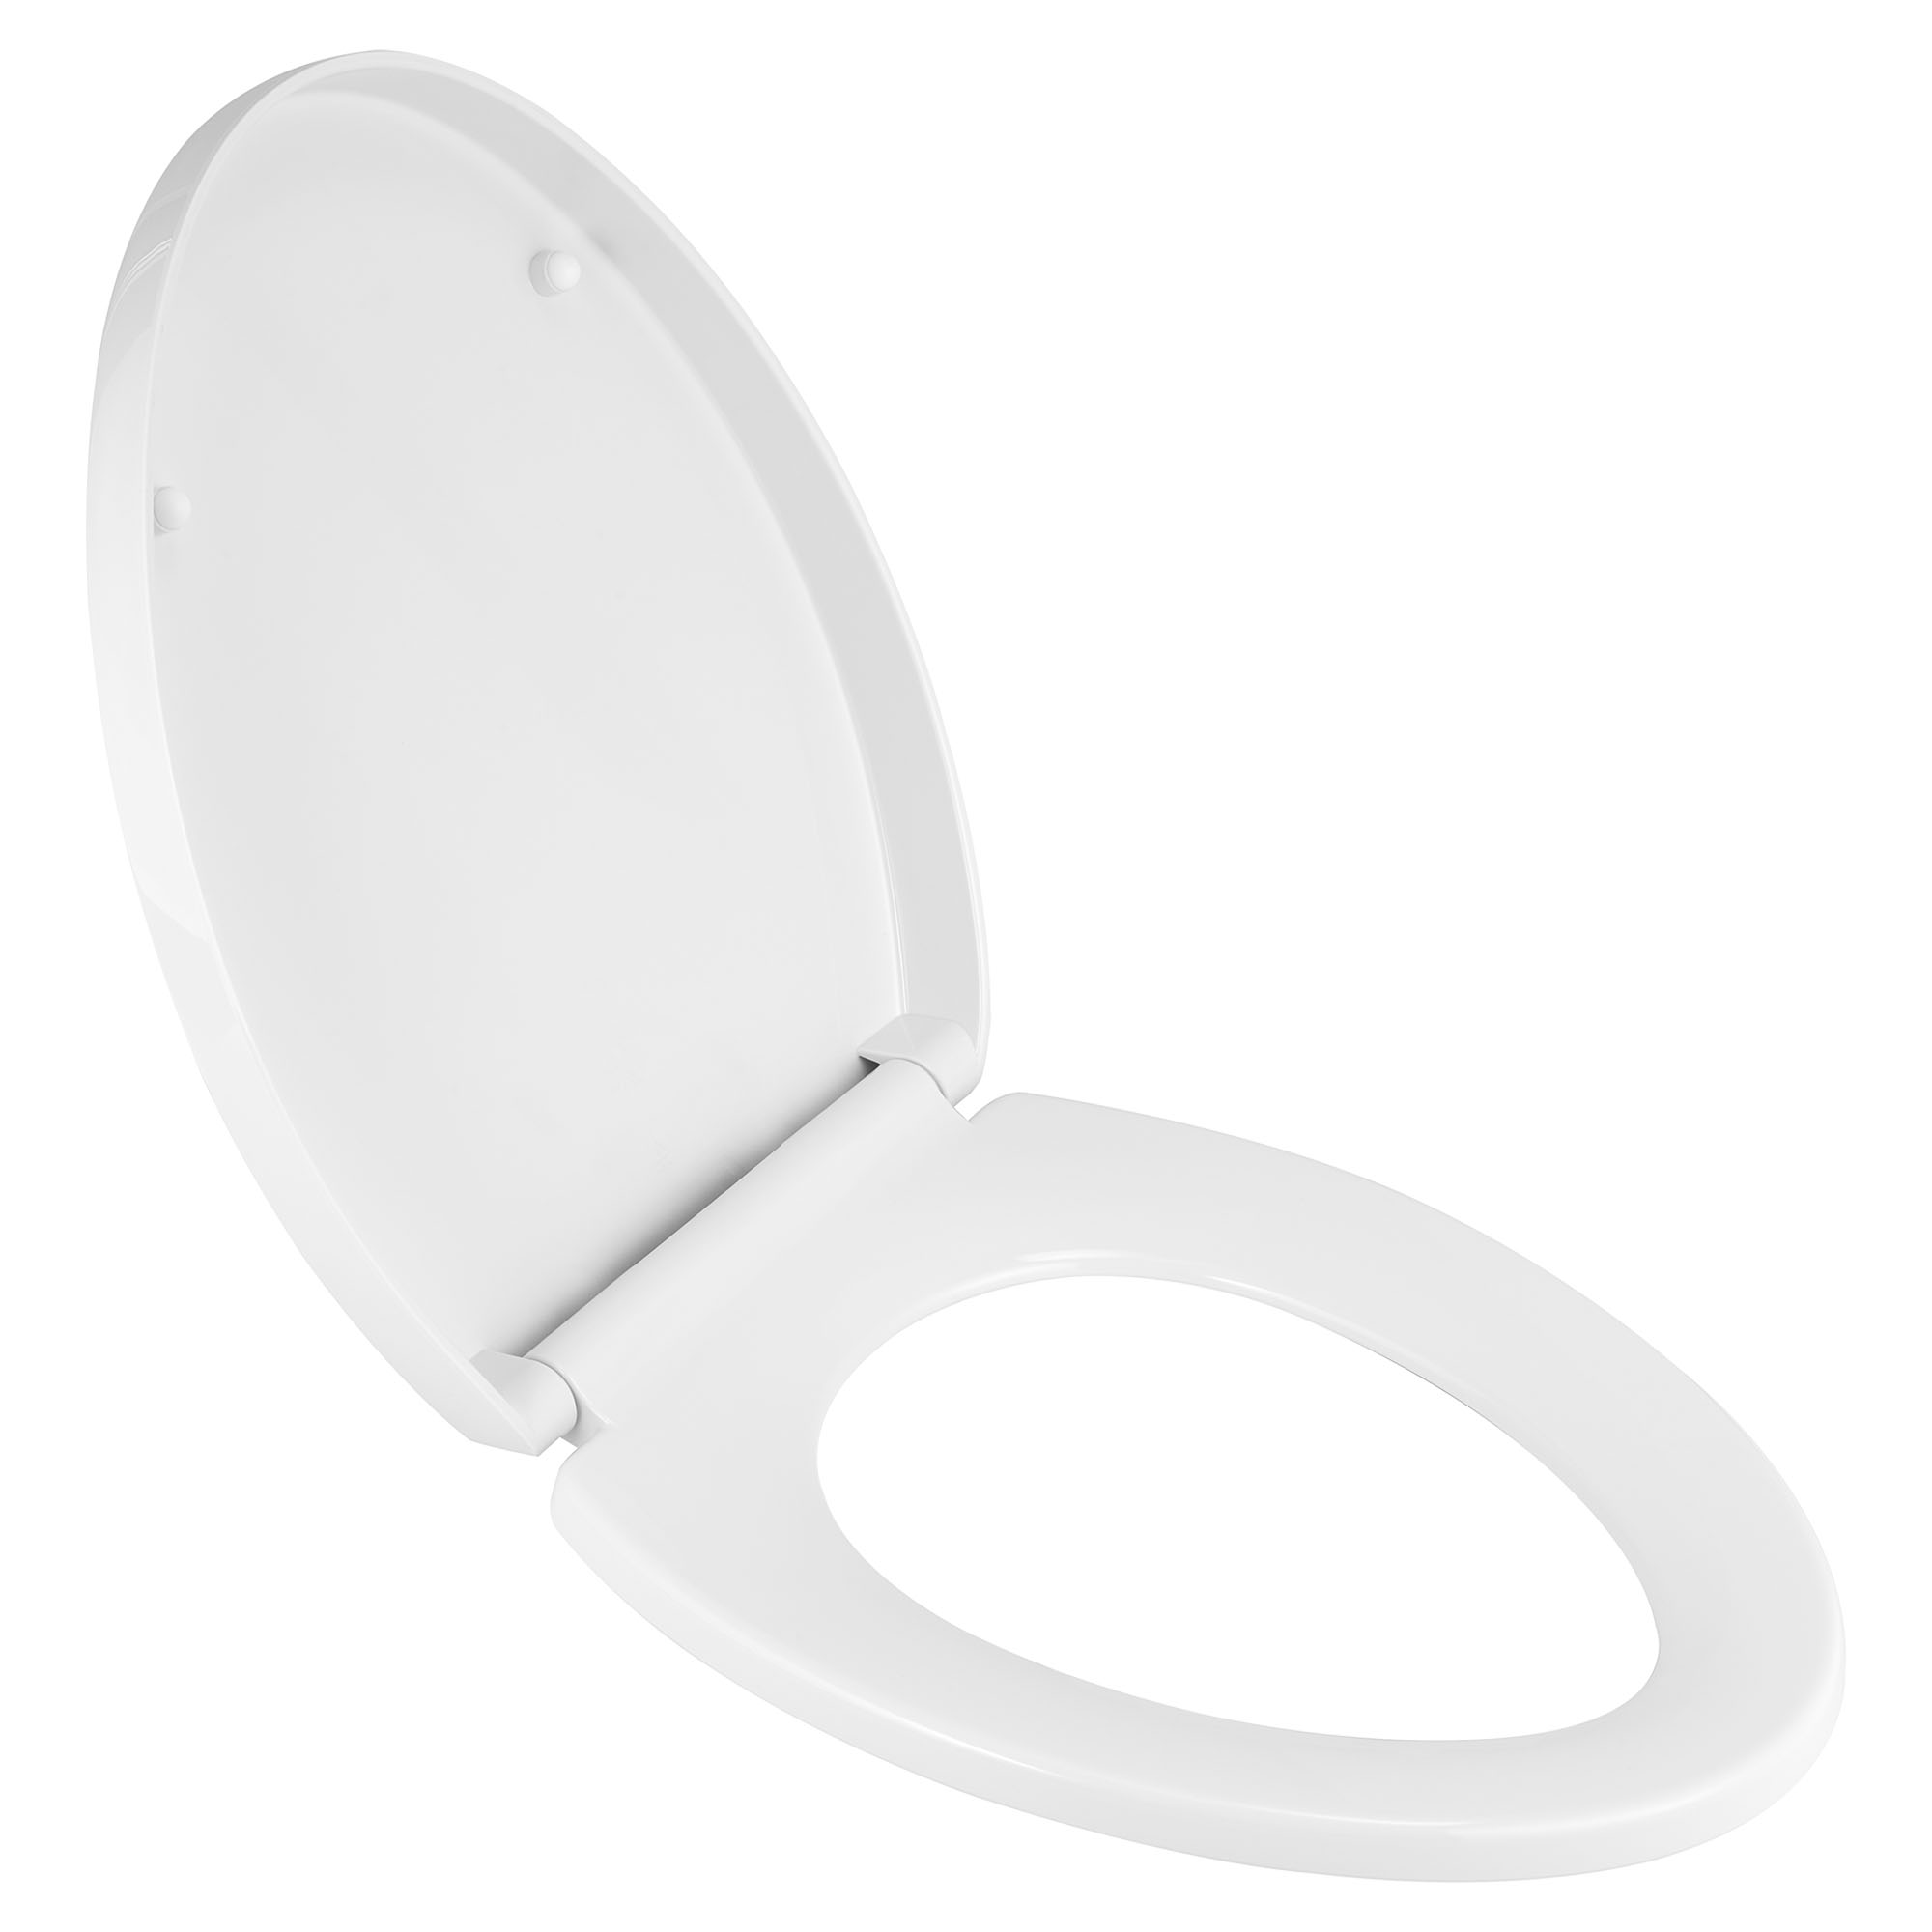 Contemporary Elongated Closed Front Toilet Seat